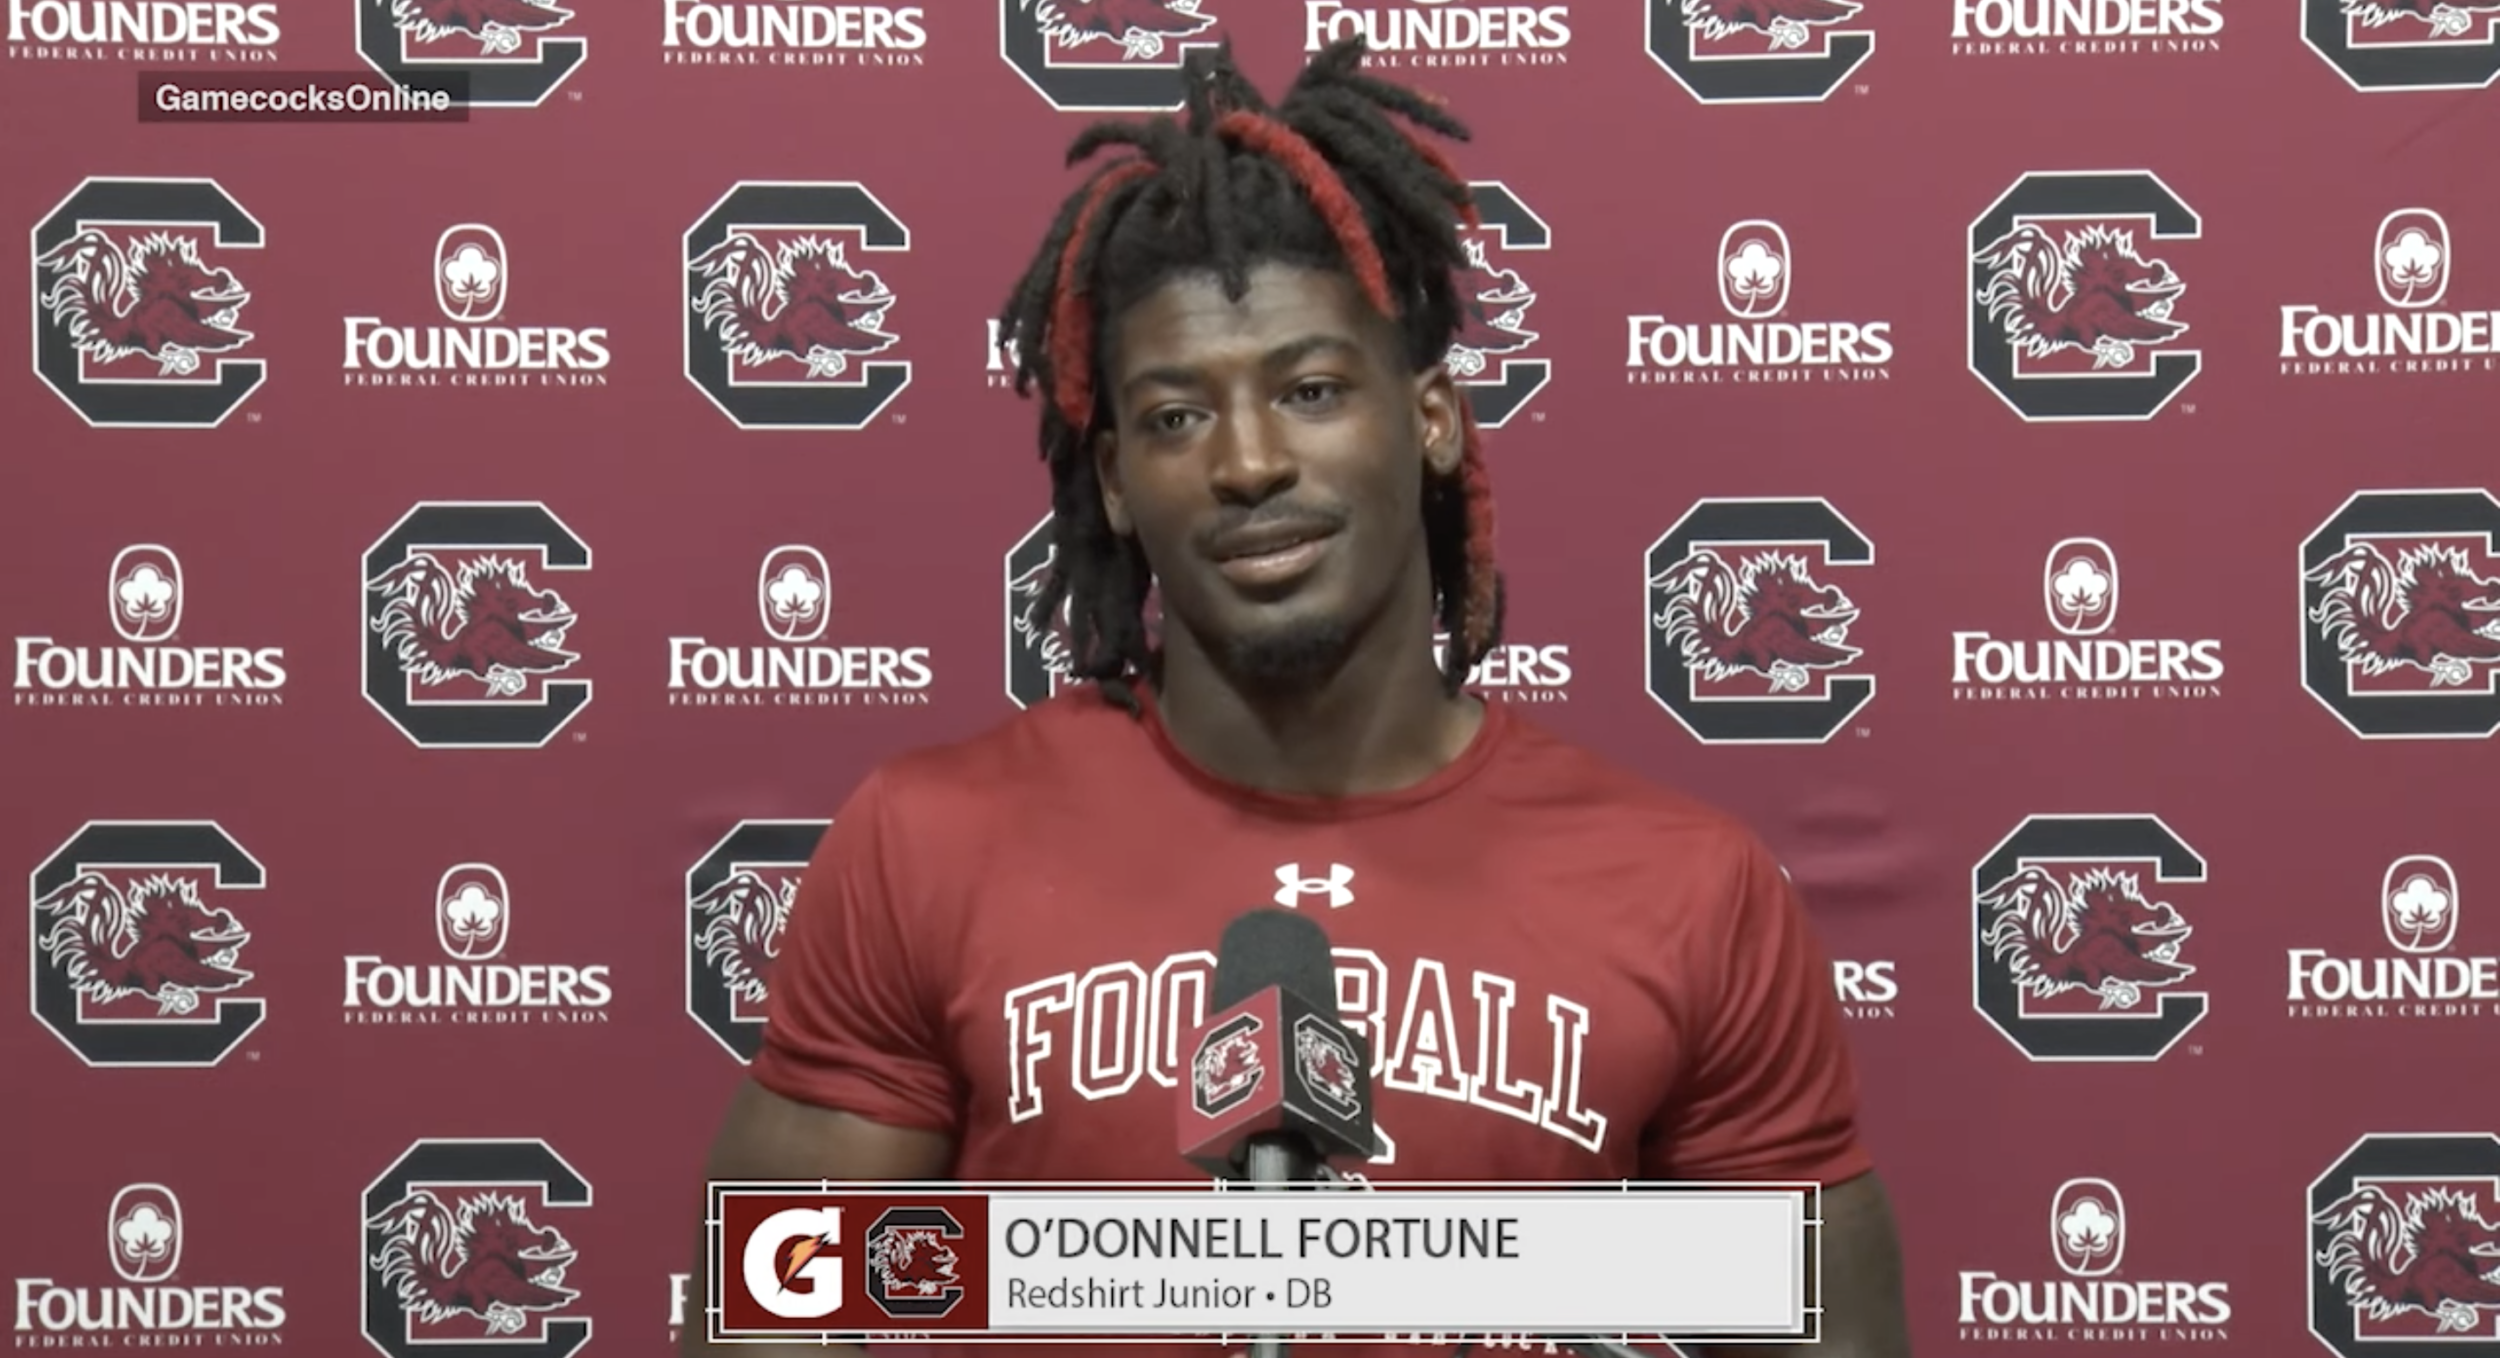 Football: O'Donnell Fortune News Conference